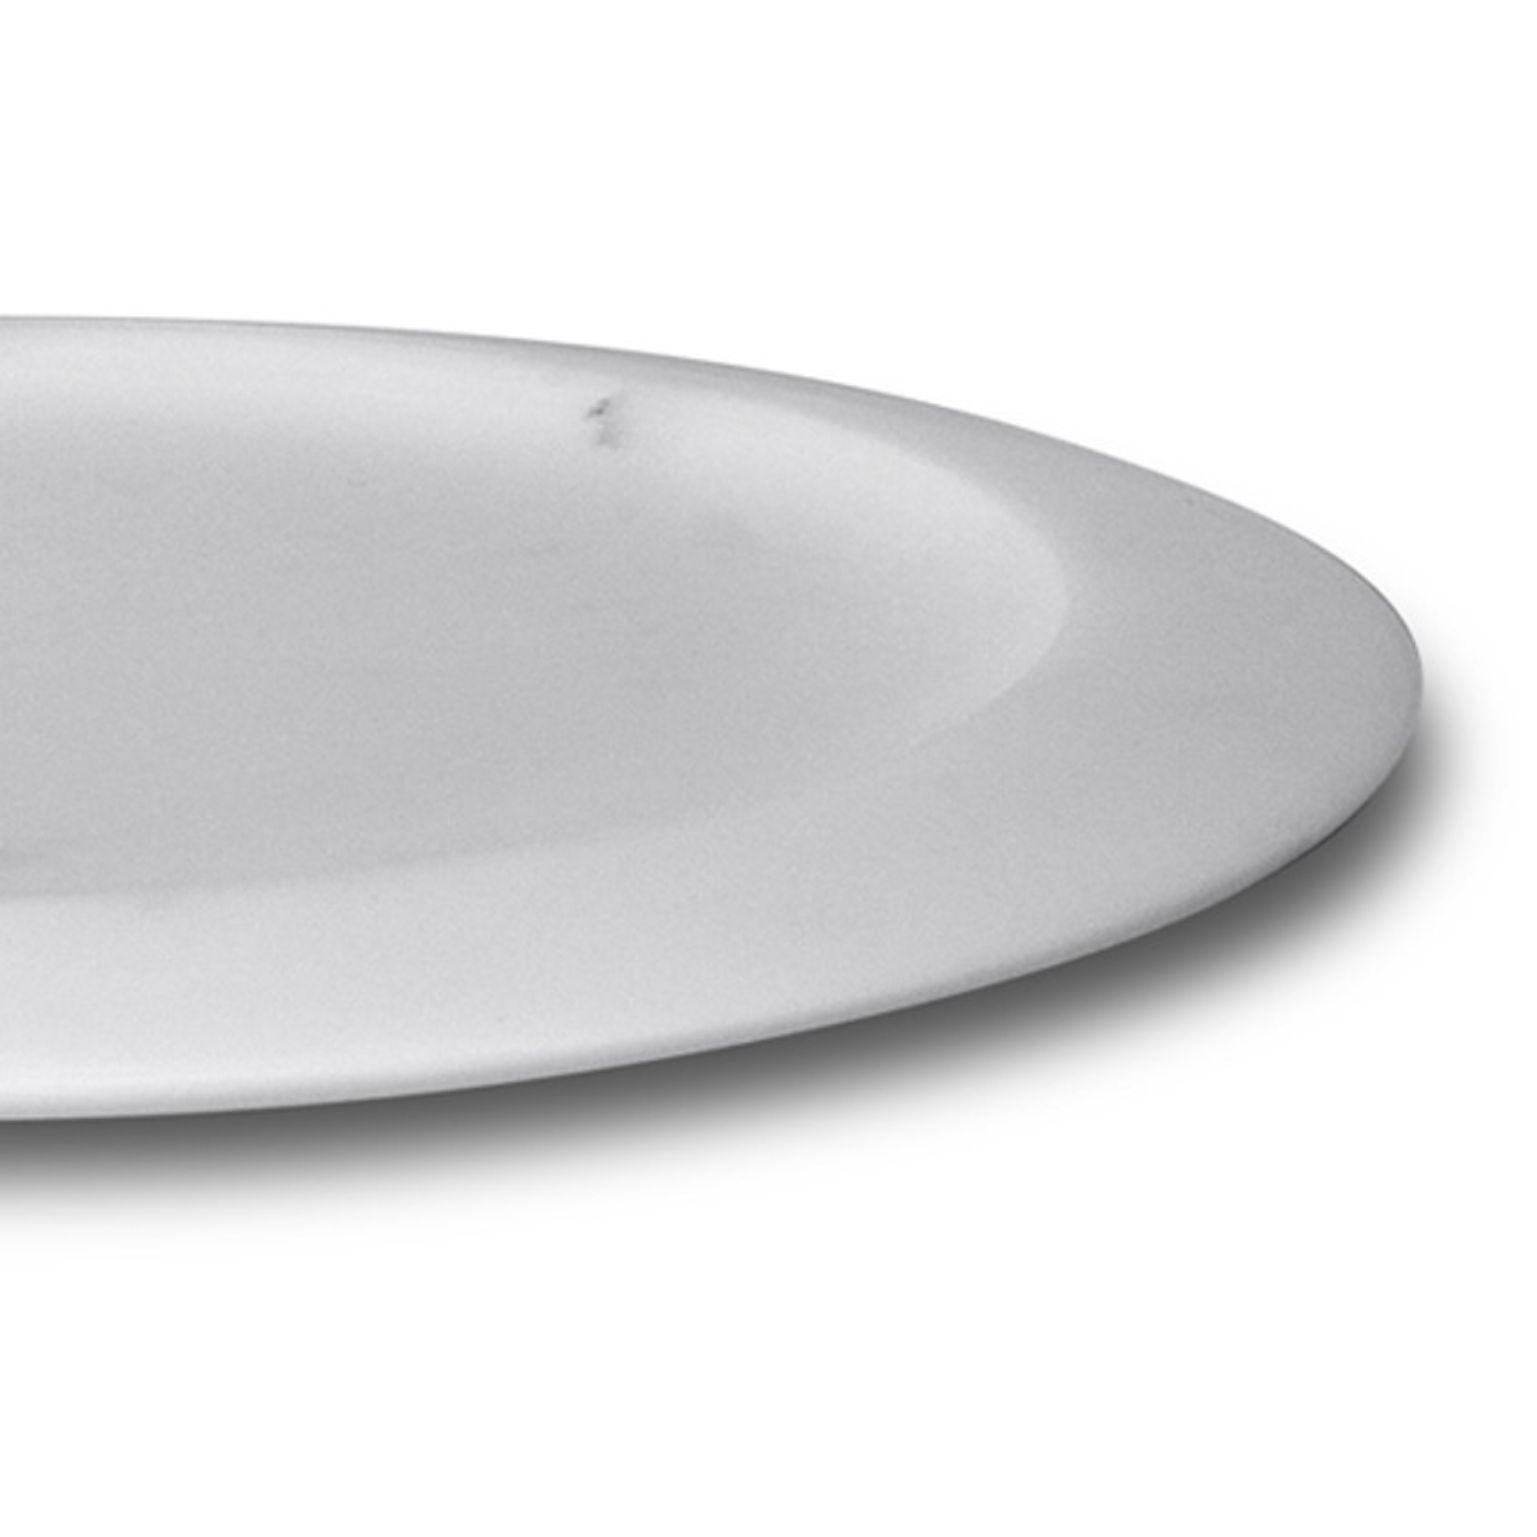 Italian Piatto Piano #2, Dining Plate, White by Ivan Colominas For Sale